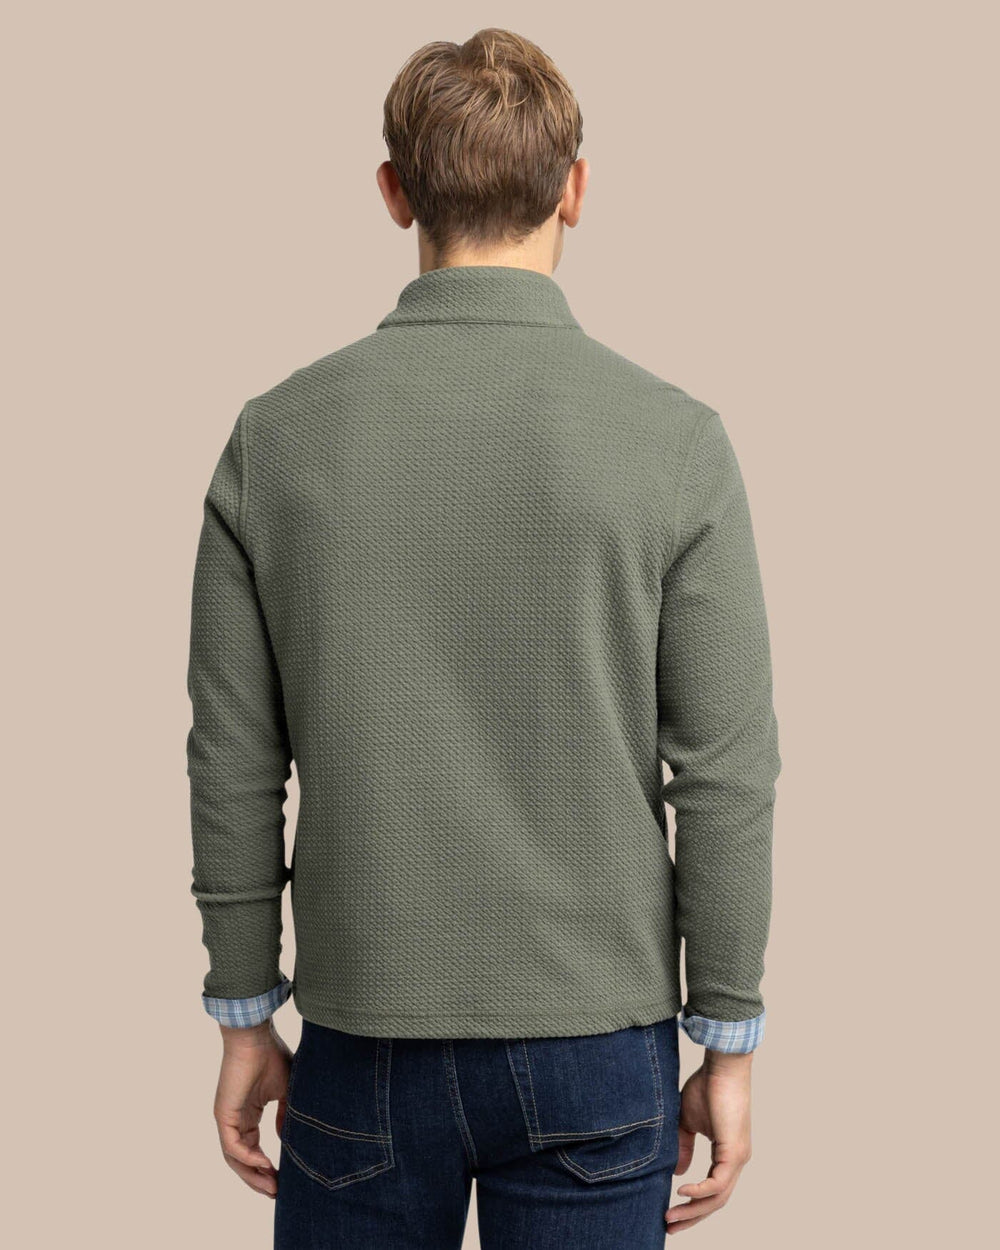 The back view of the Southern Tide Heather Outbound Quarter Zip by Southern Tide - Heather Gulf Green